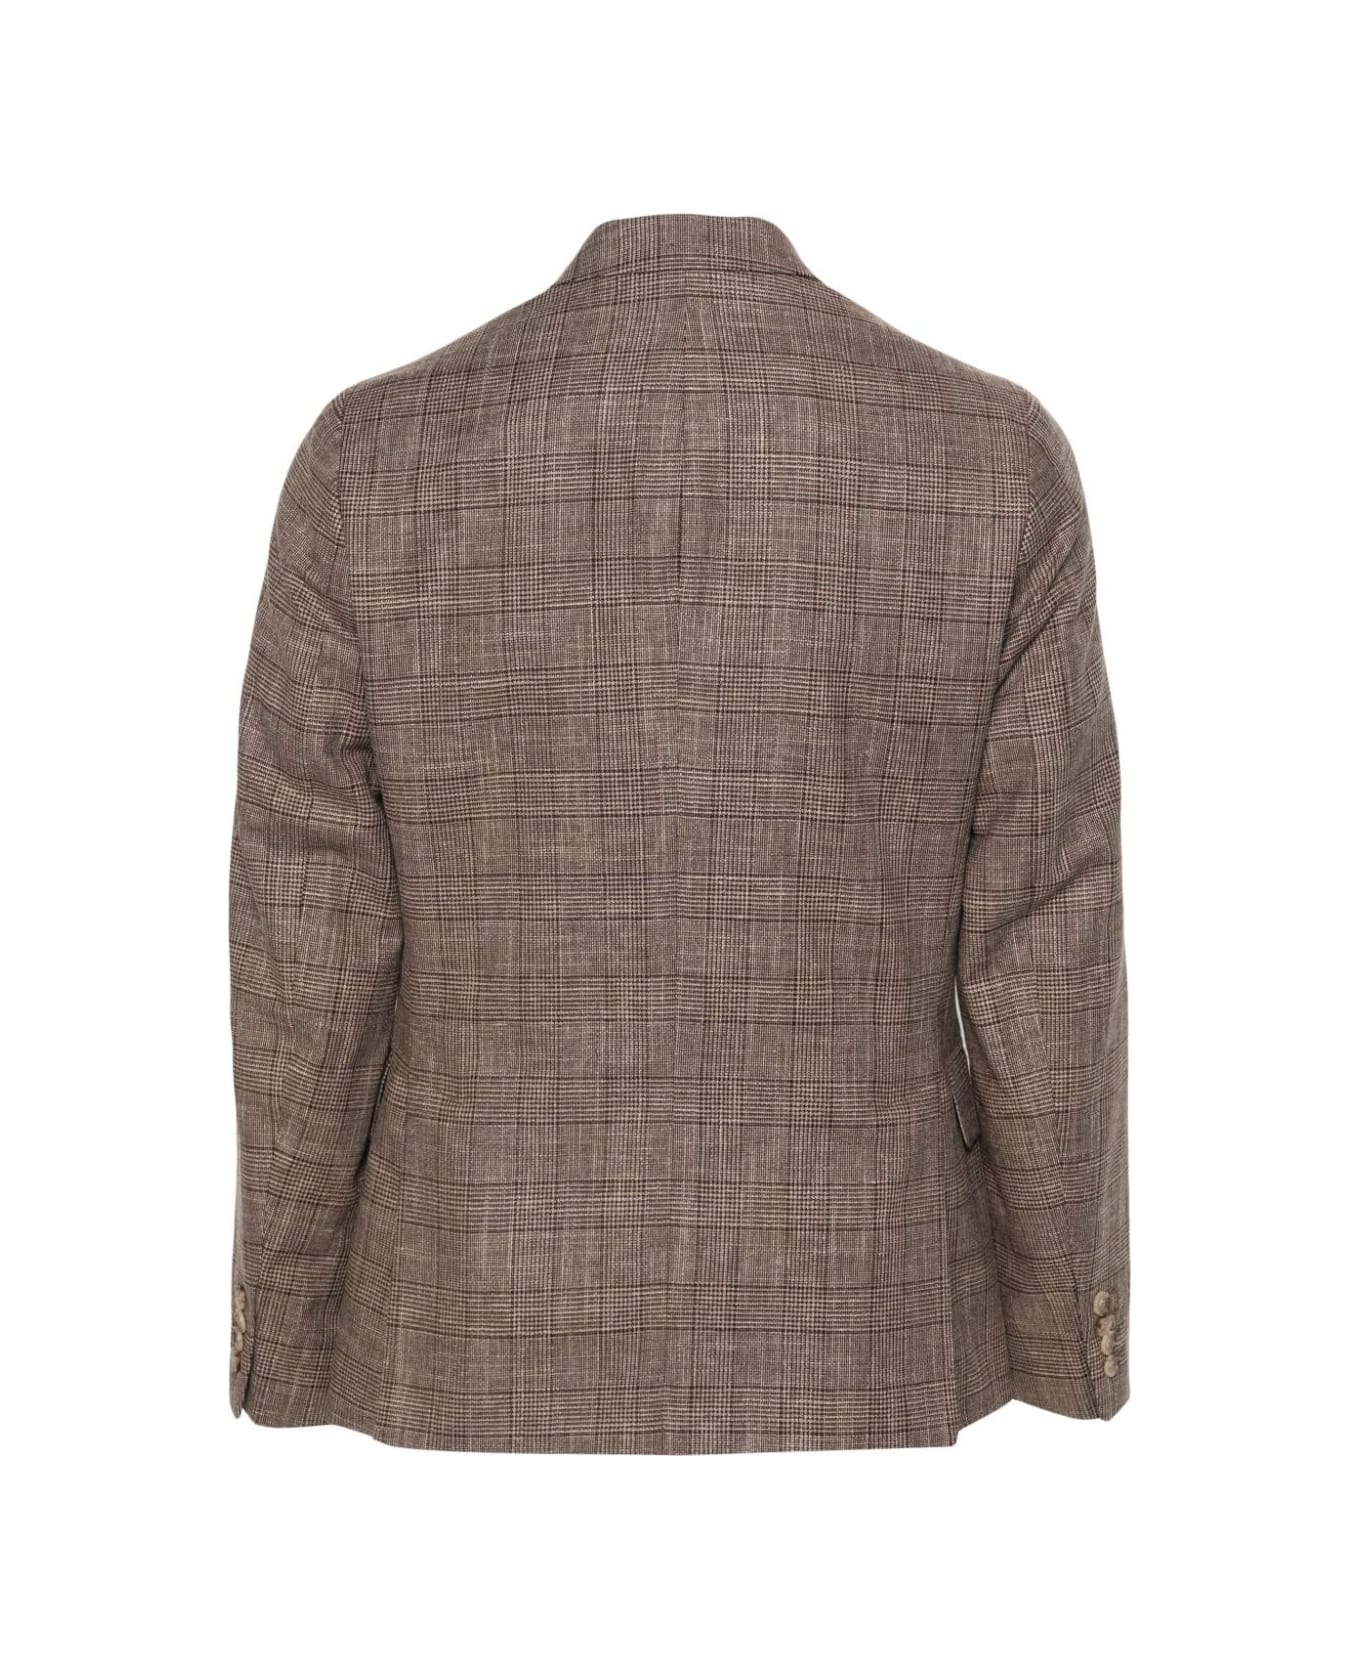 Paul Smith Mens Two Buttons Jacket - Brown